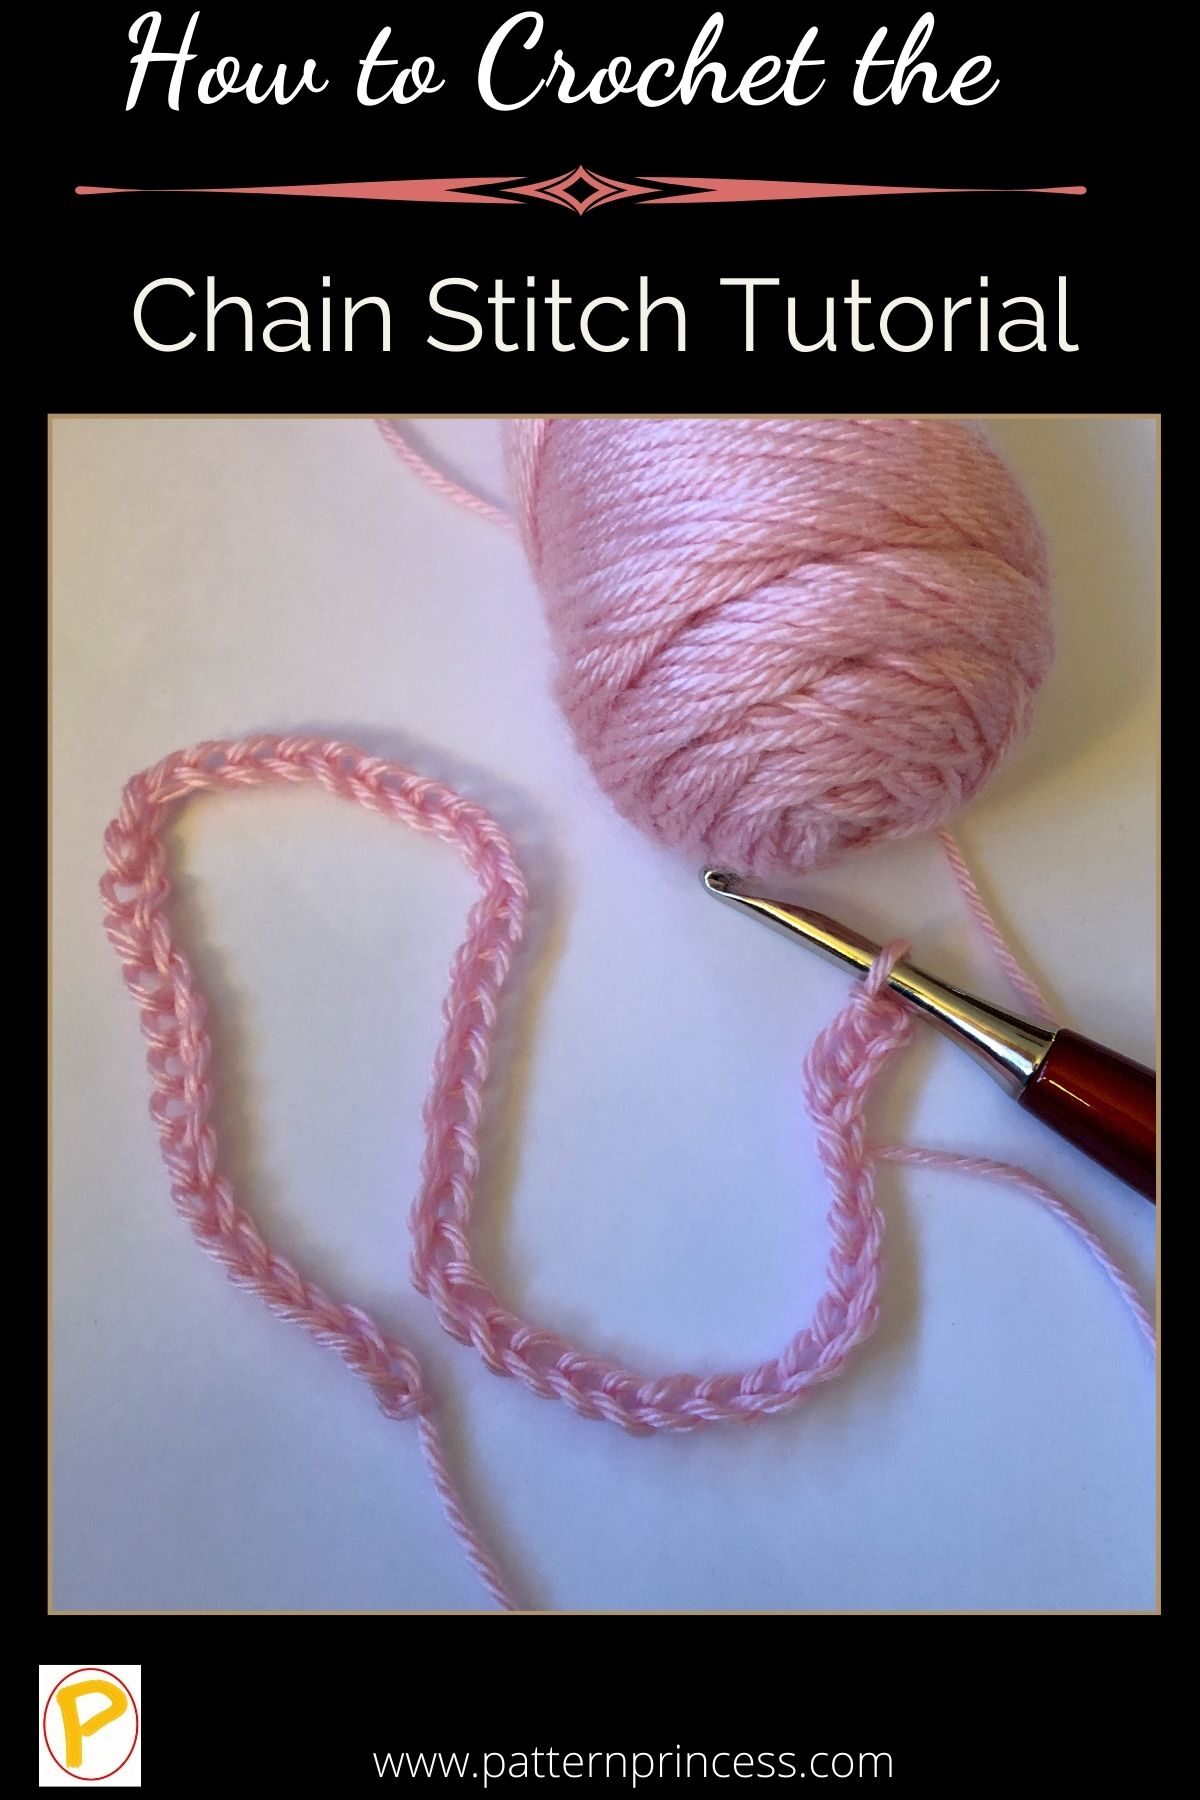 How to Crochet the Chain Stitch Tutorial